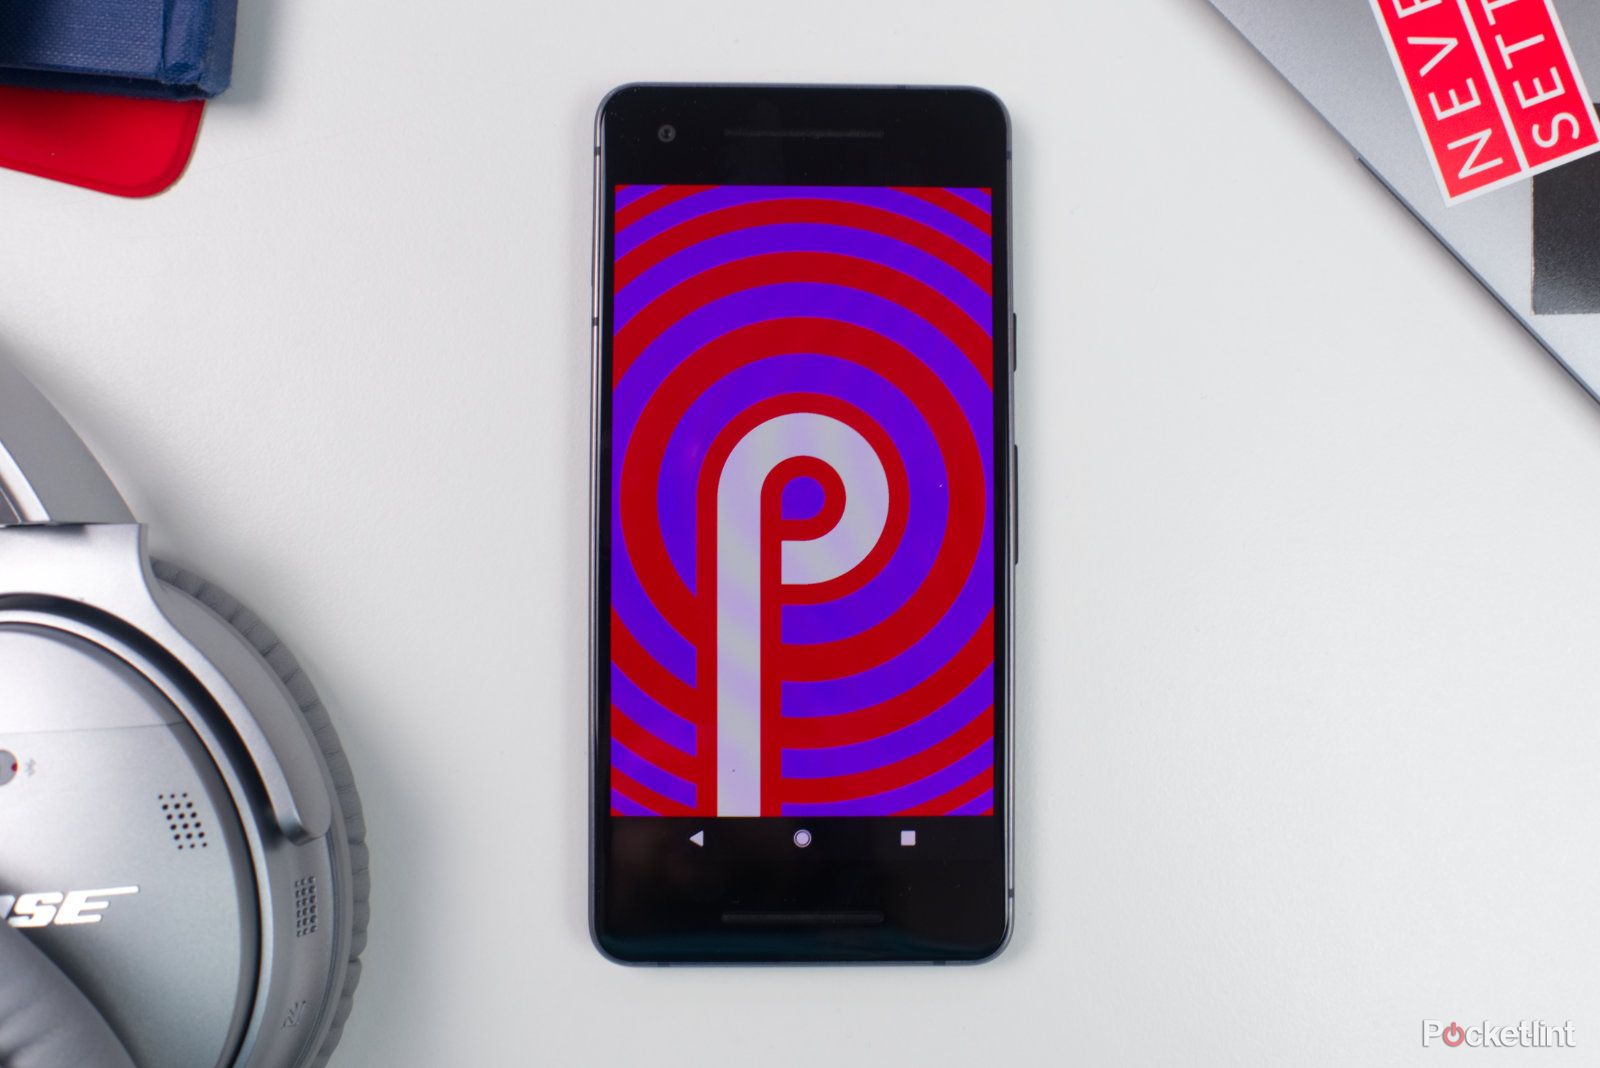 Android P might introduce gesture-controlled navigation image 1